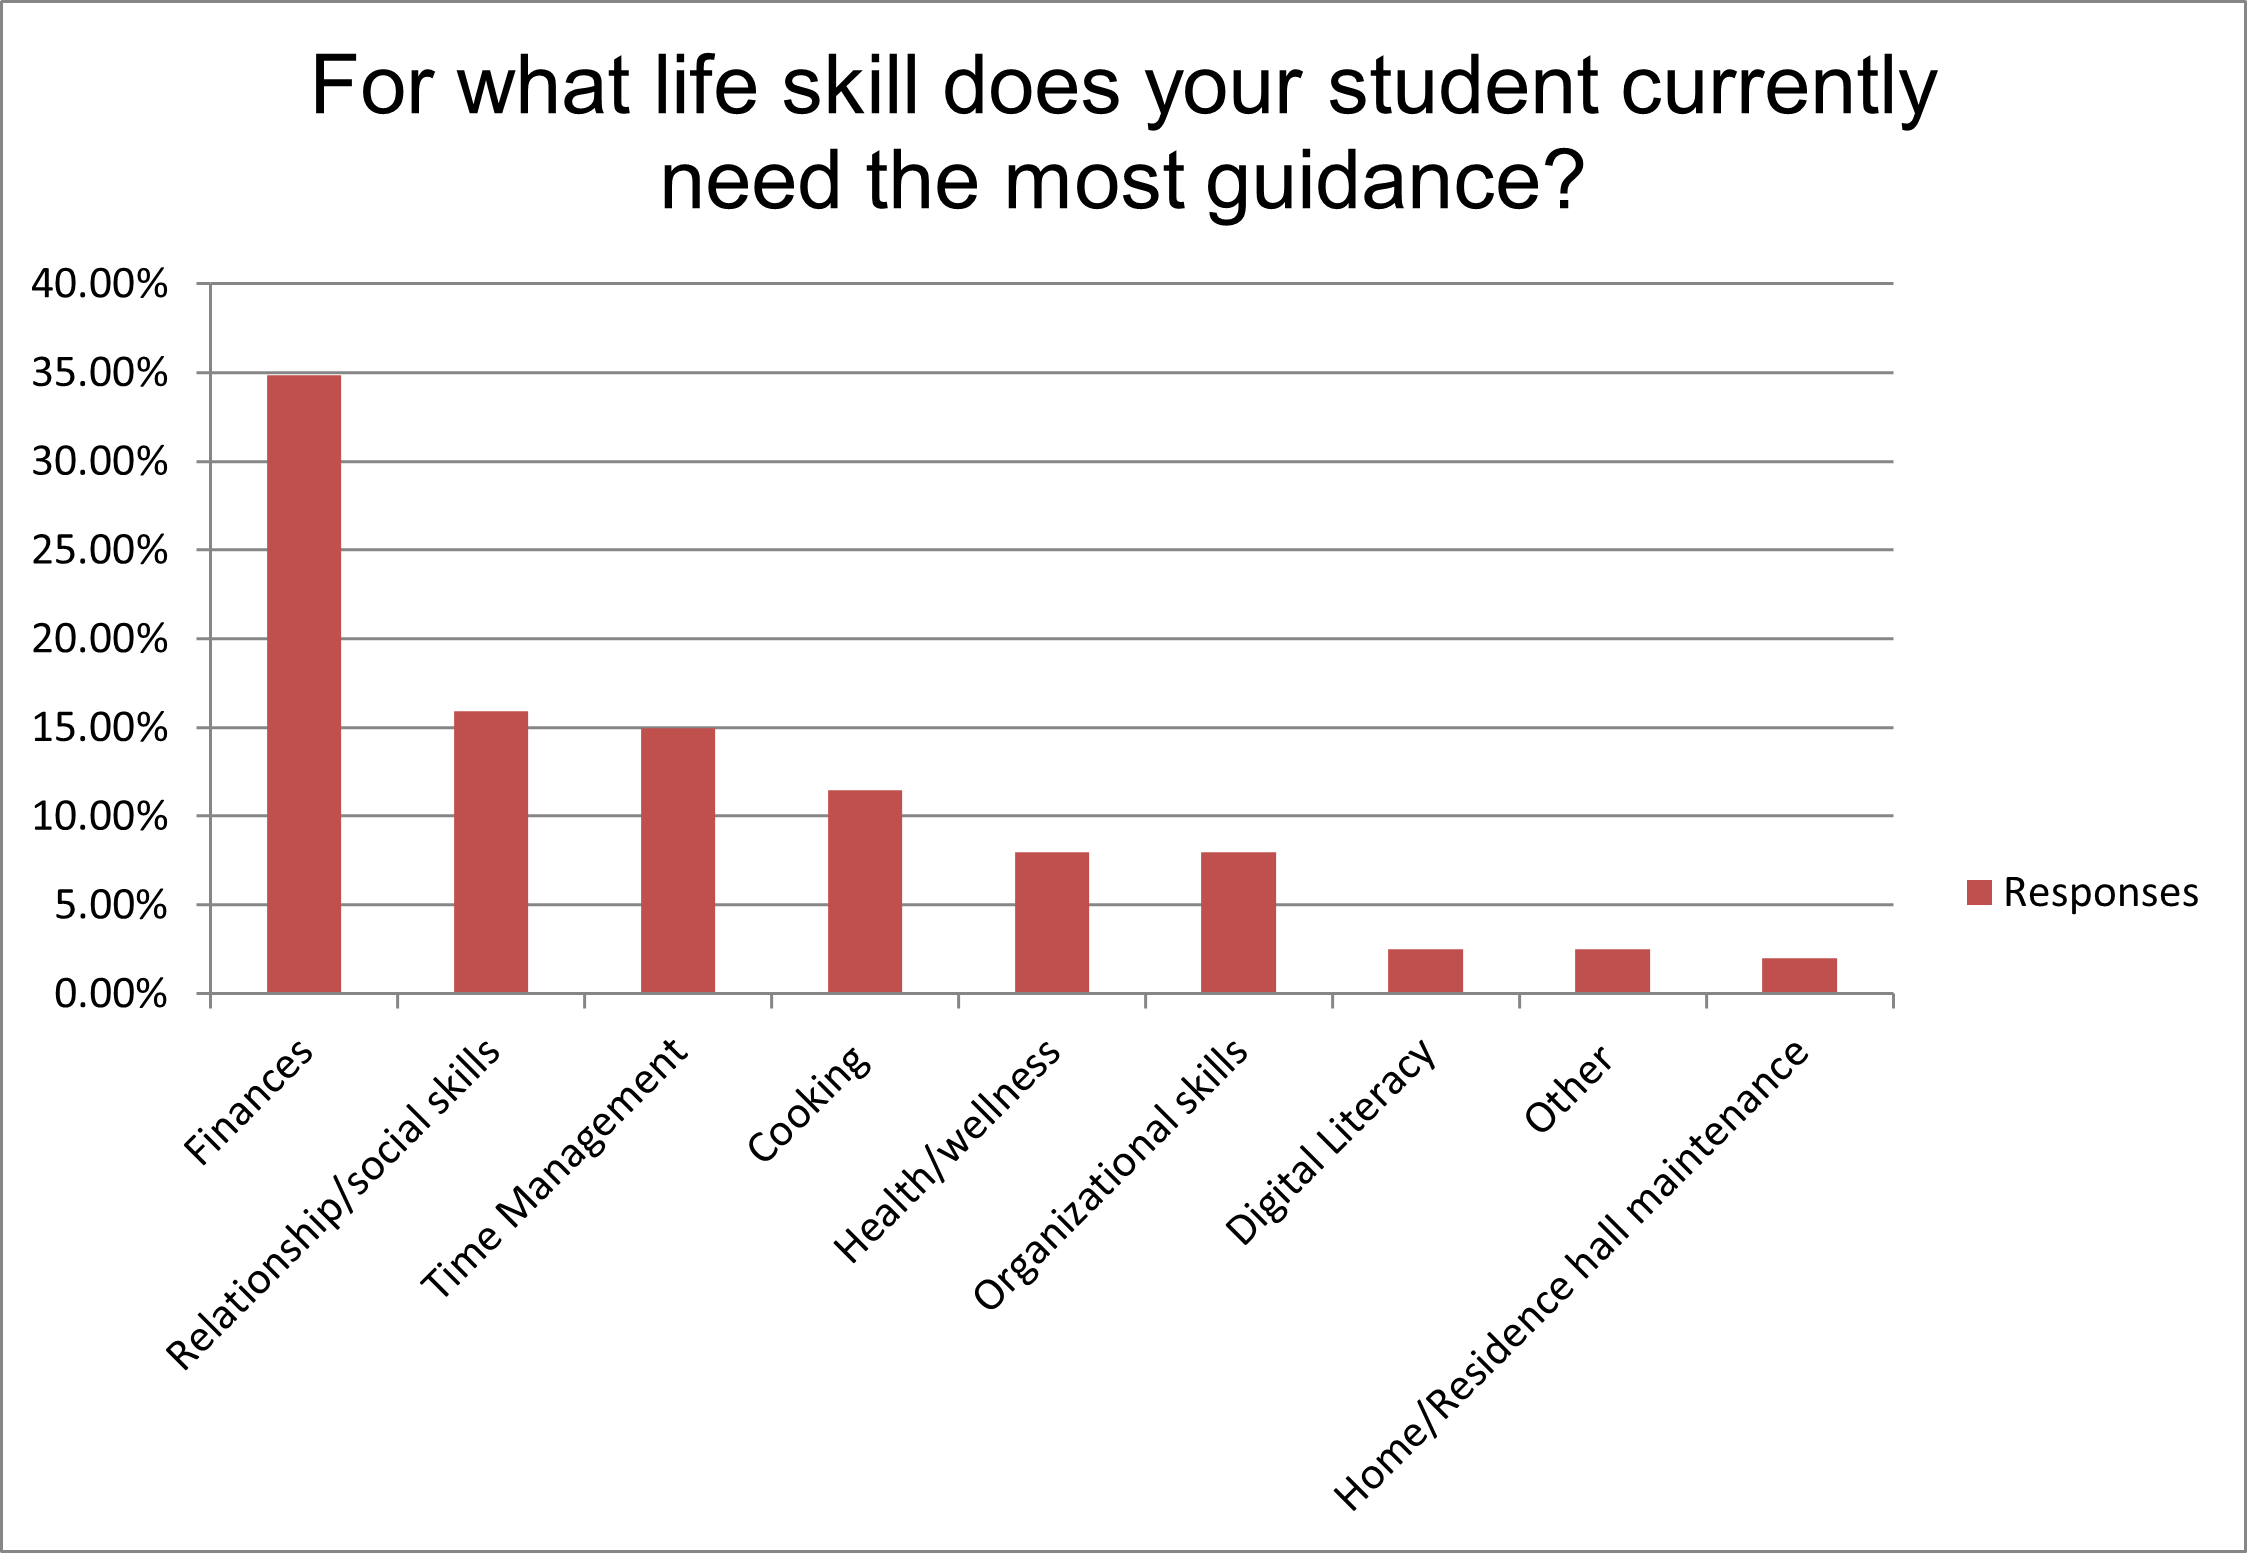 Chart showing life skills parents report their students needing most assistance with. Top three were finances, social/relationship skills, and time management. 